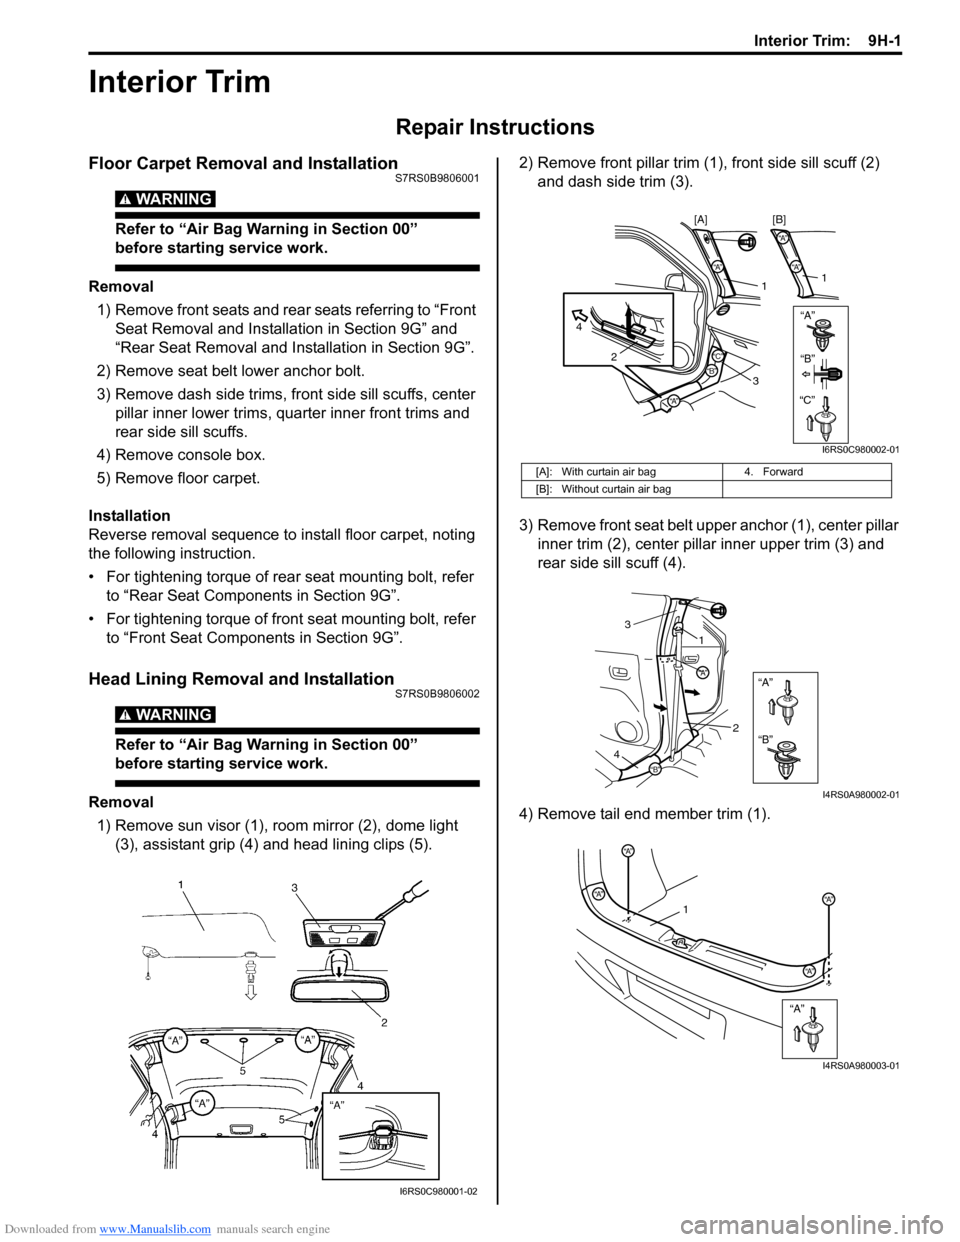 SUZUKI SWIFT 2007 2.G Service Workshop Manual Downloaded from www.Manualslib.com manuals search engine Interior Trim:  9H-1
Body, Cab and Accessories
Interior Trim
Repair Instructions
Floor Carpet Removal and InstallationS7RS0B9806001
WARNING! 
R